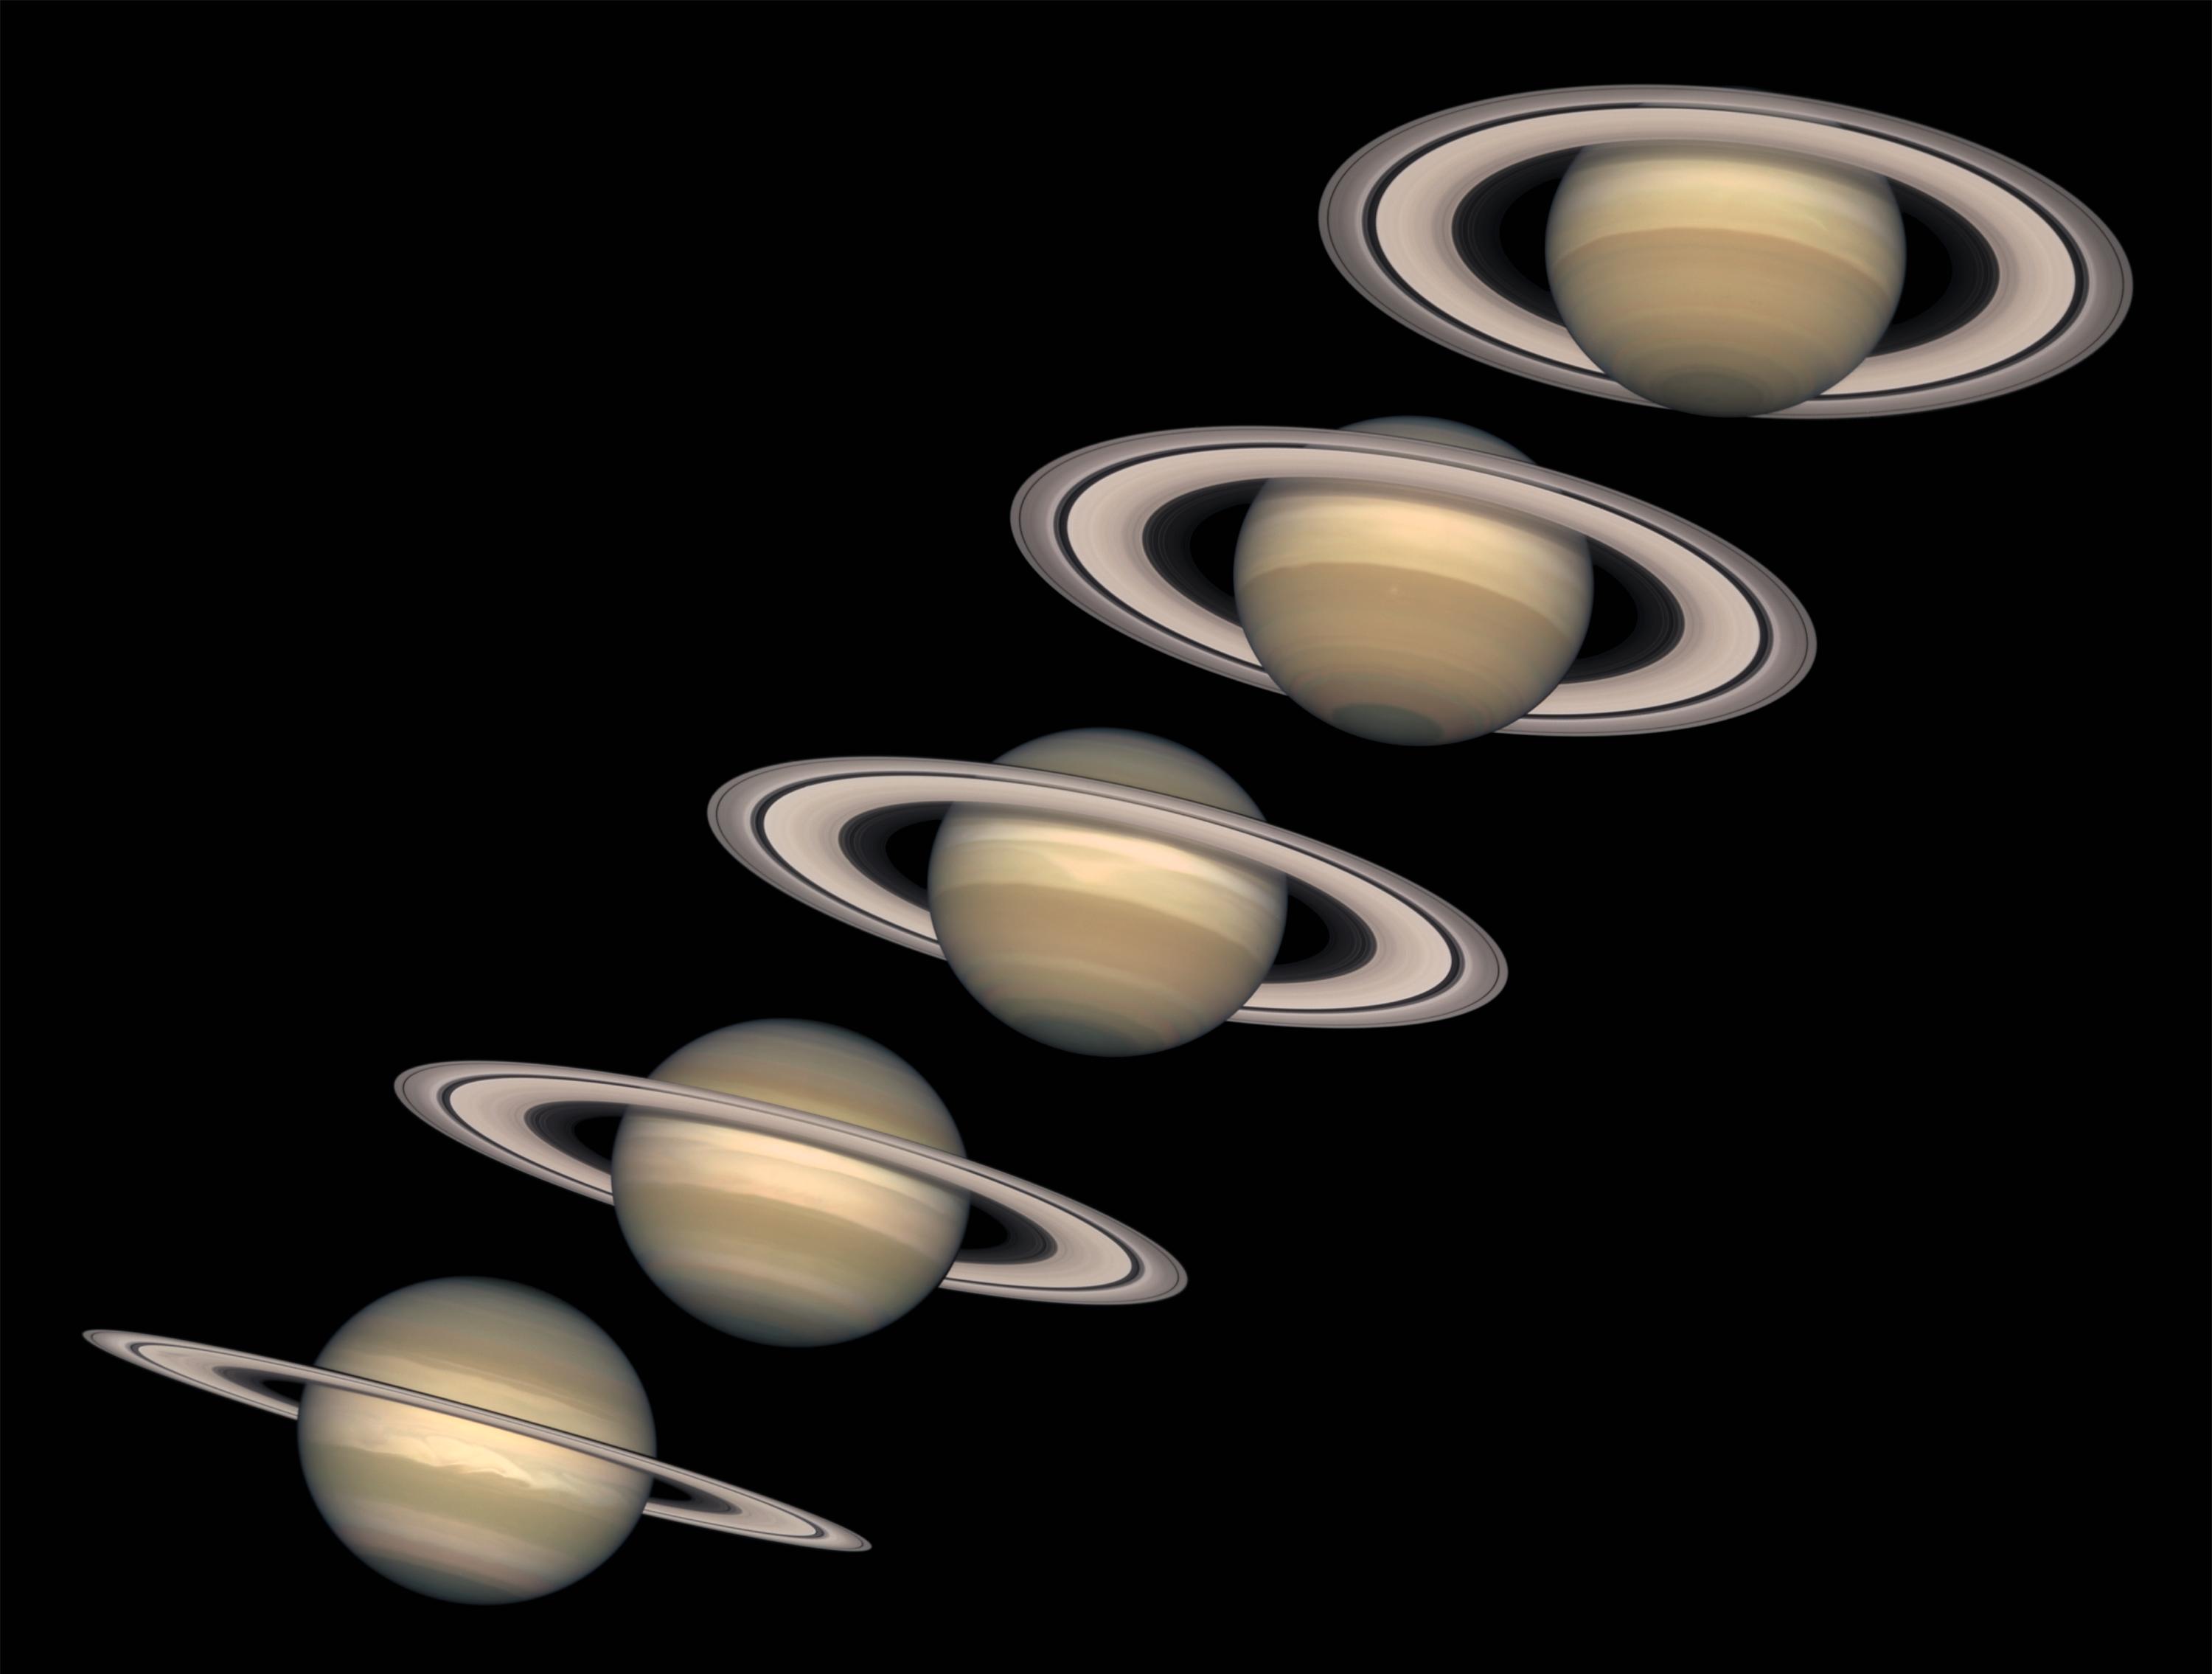 Series of images of Saturn